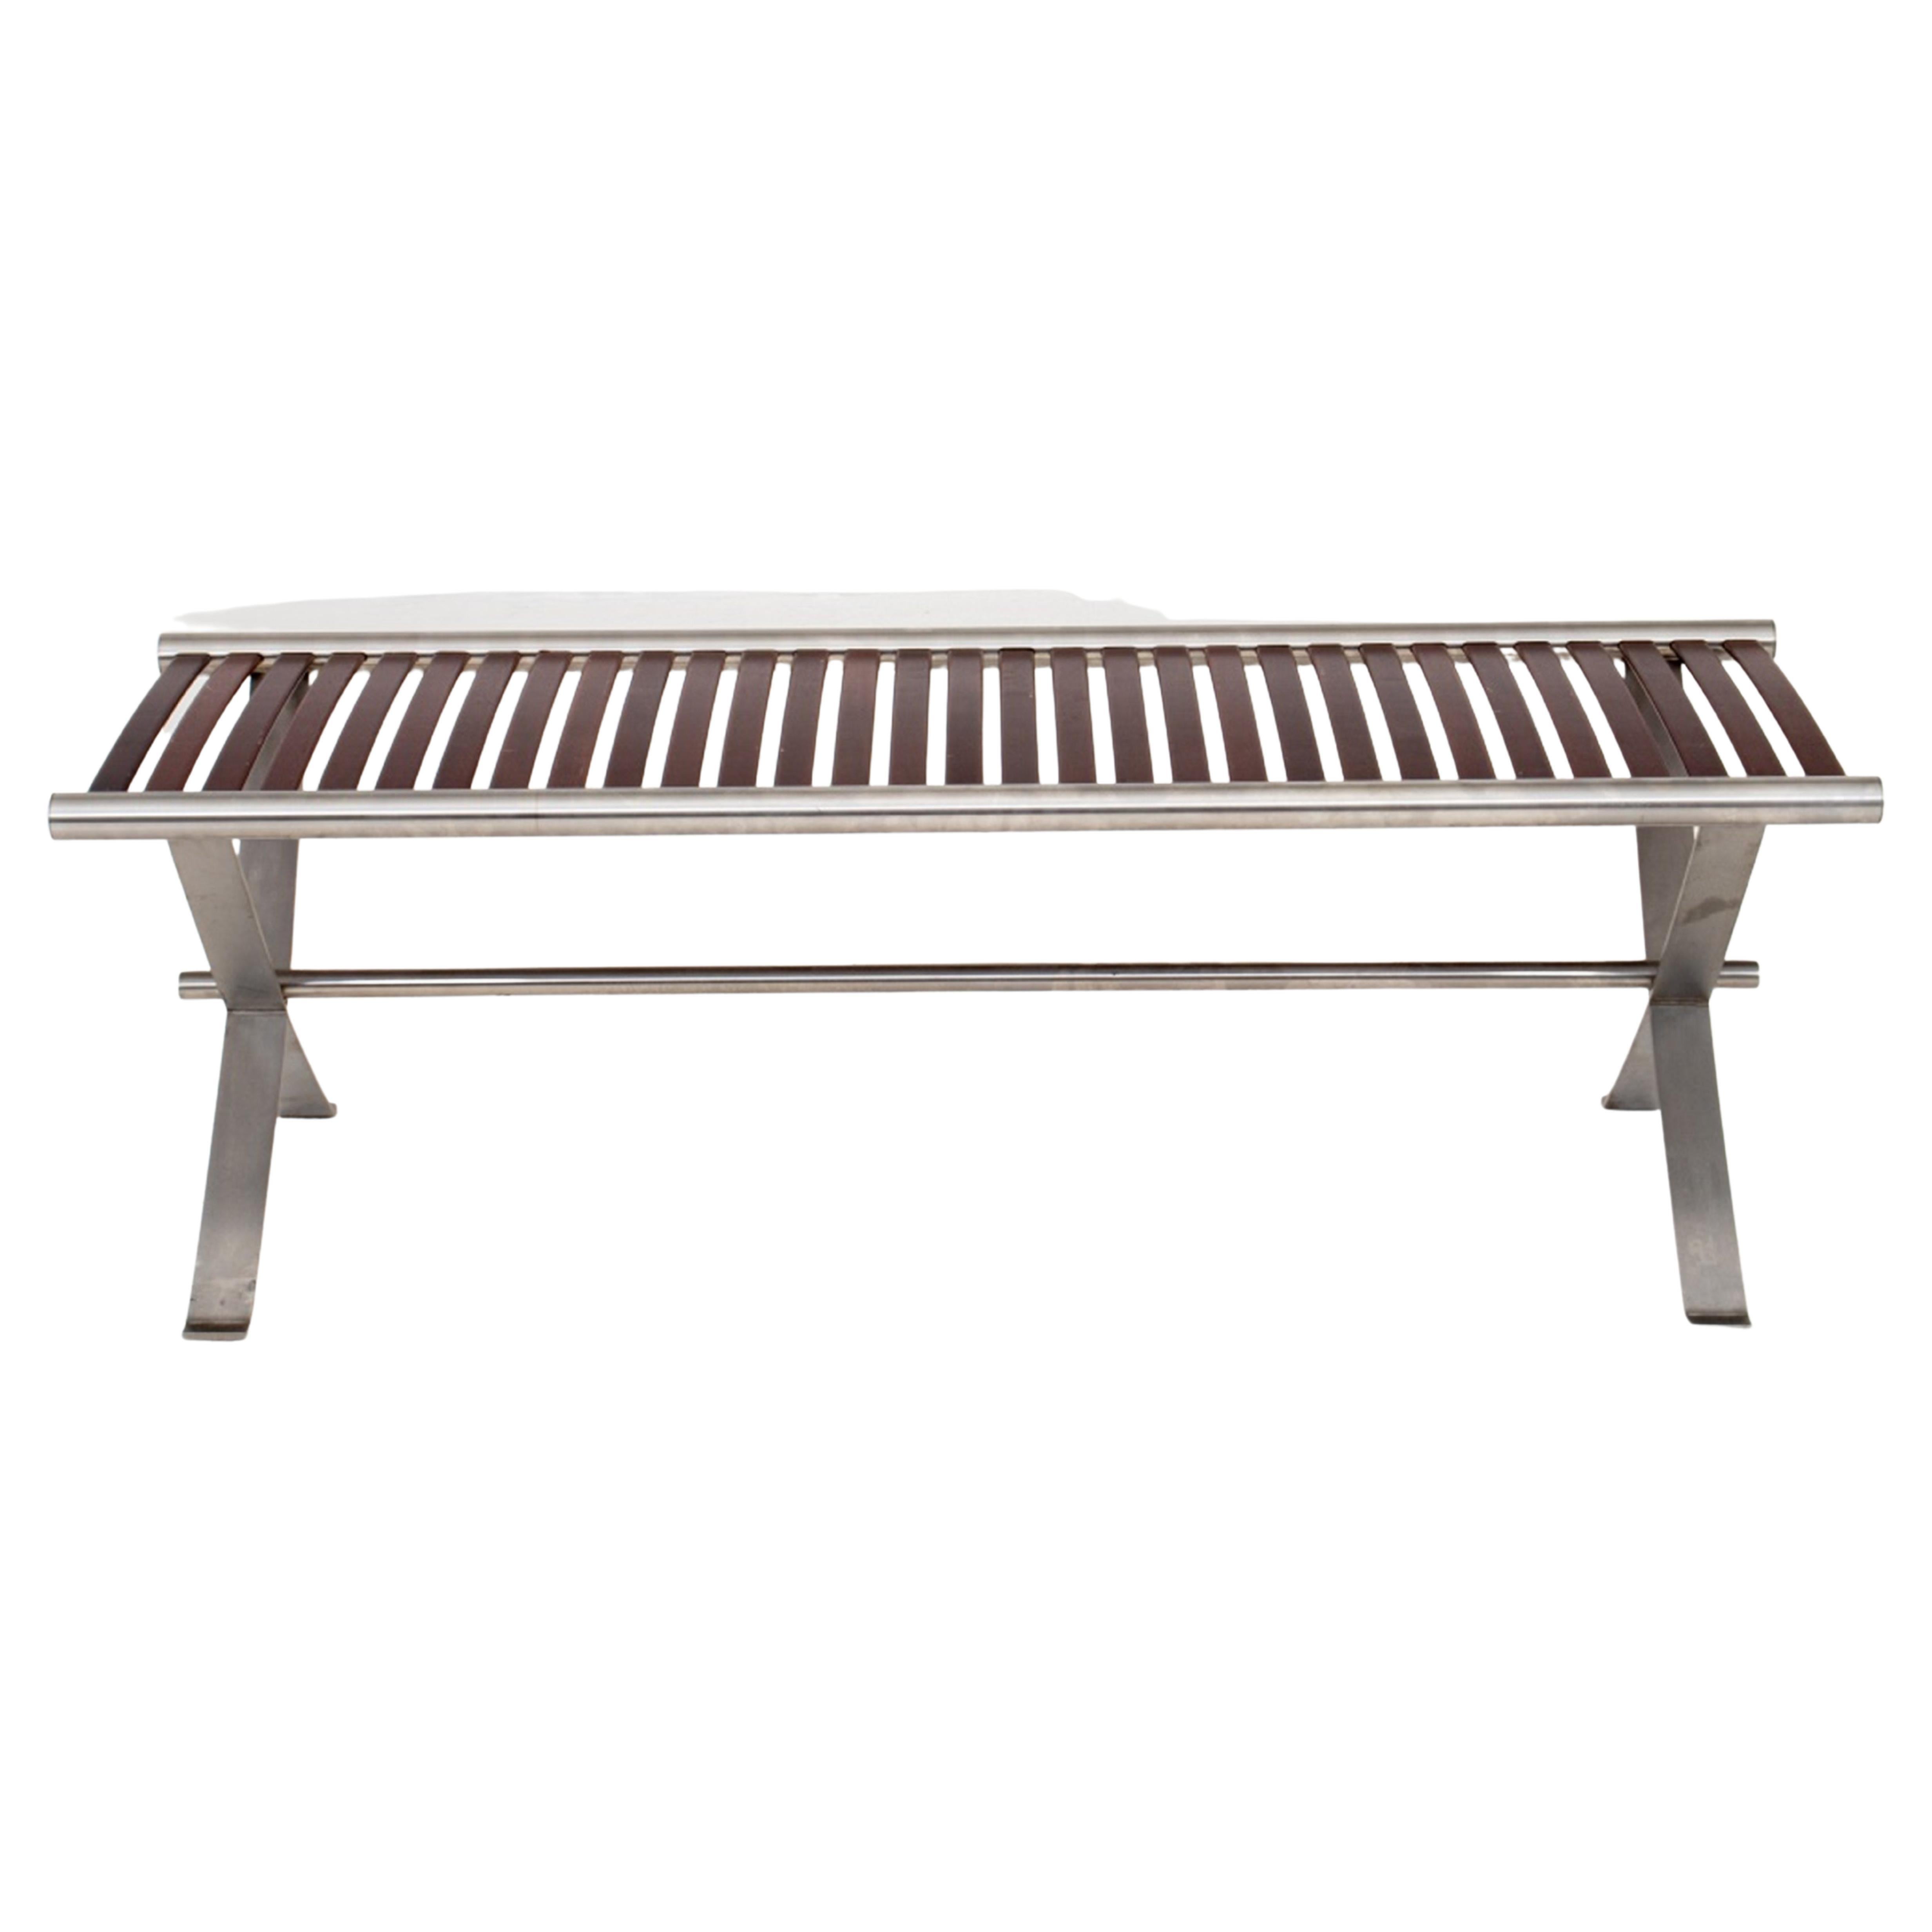 Postmodern Style Steel and Wood Bench